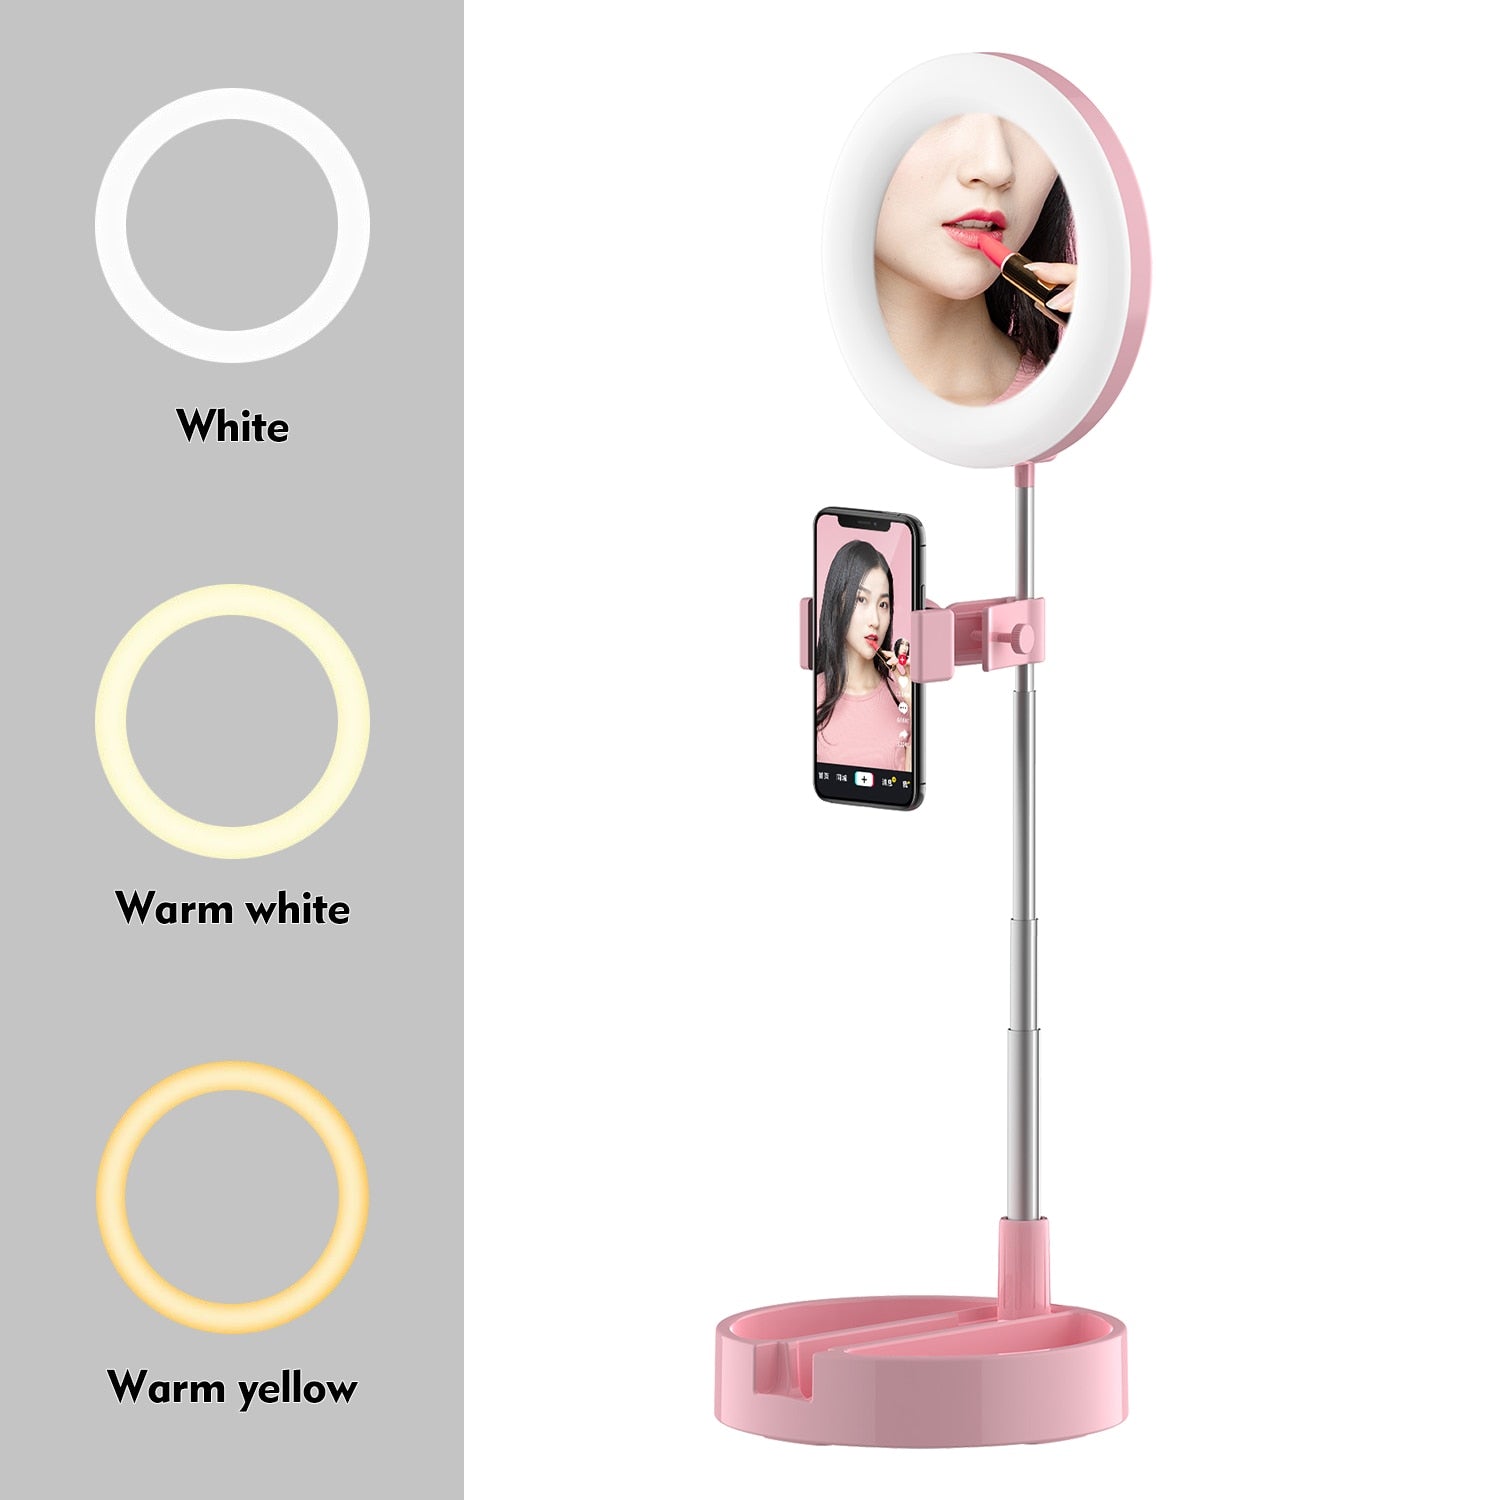 Retractable G3 LED Selfie Light Phone Holder With Dimmable Tripod Stand For  Mobile Phones Ideal For Photographic, Makeup, Live Streaming, And Camera  Retail Box Included From Skylet, $9.46 | DHgate.Com